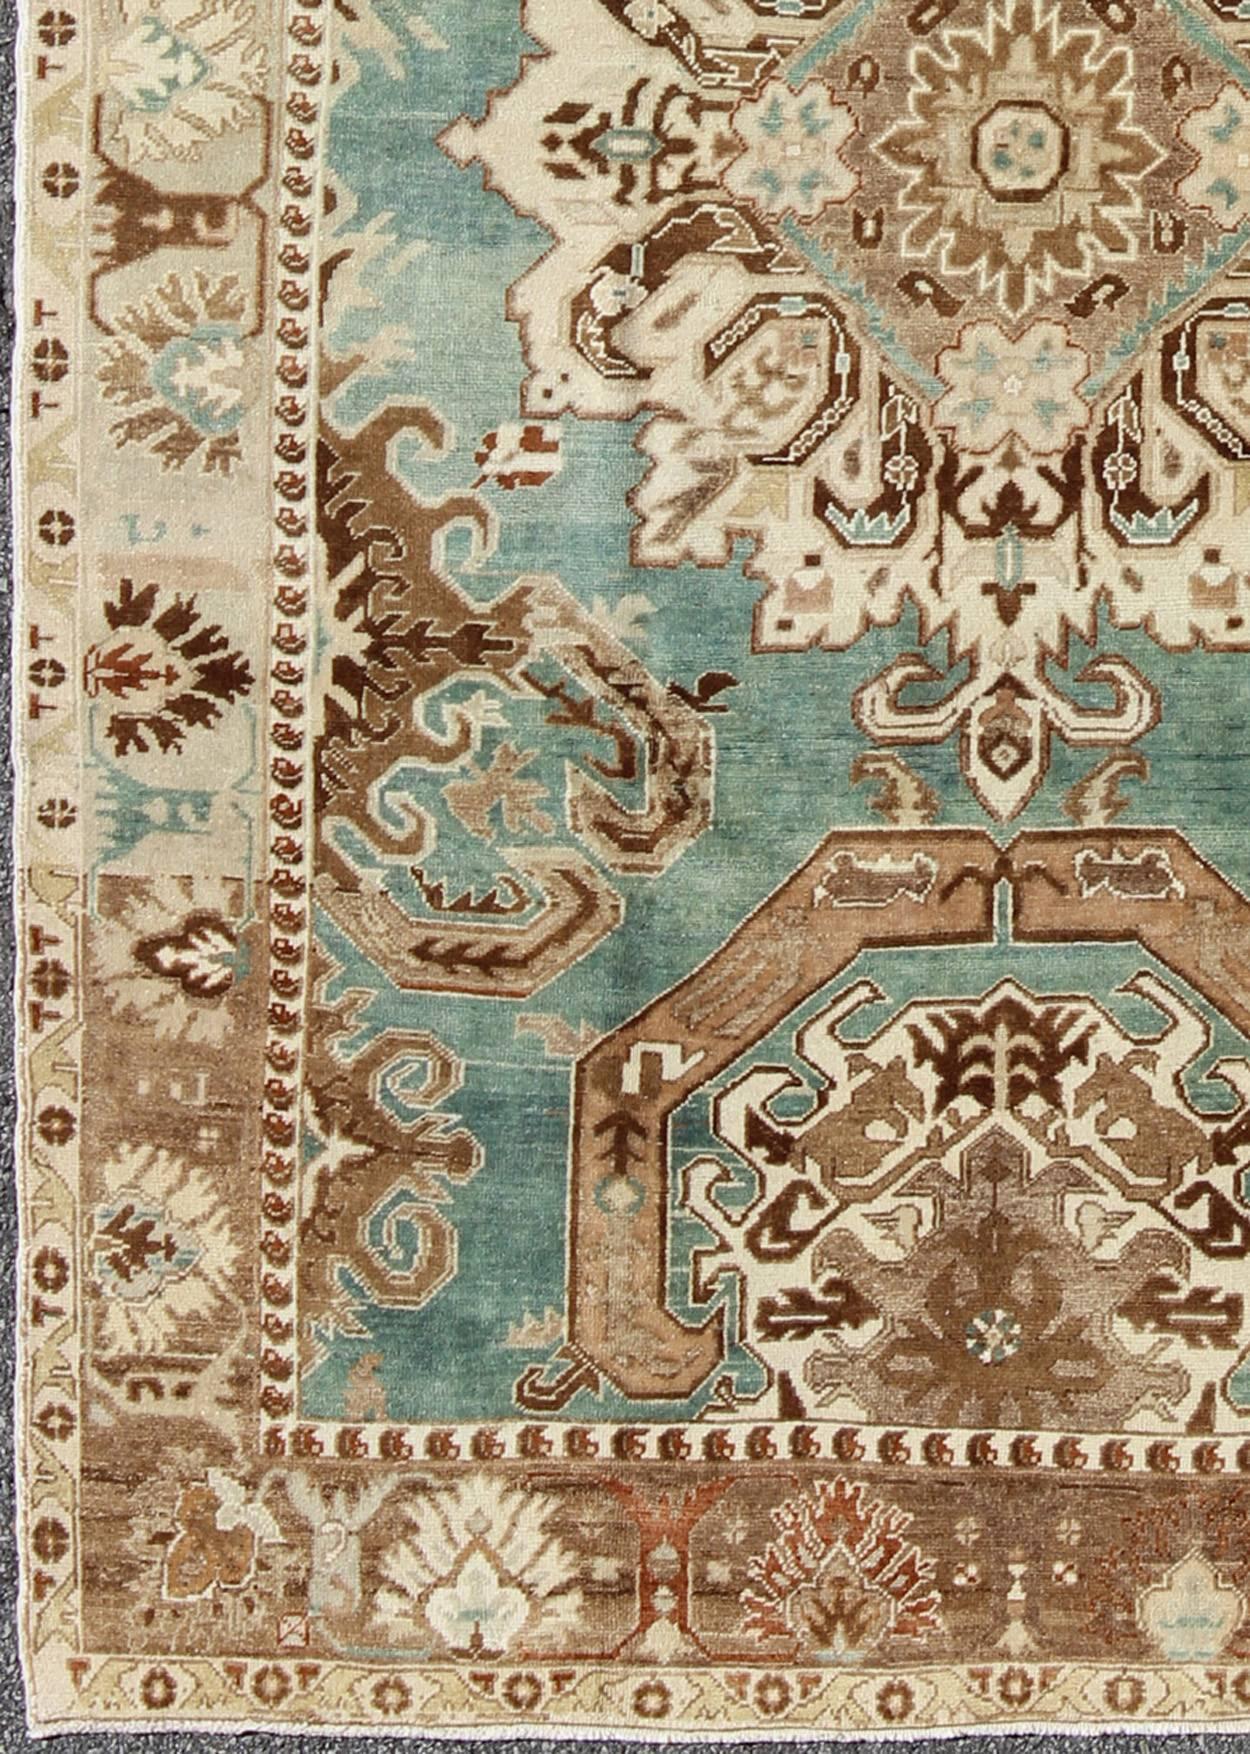 Set on a unique turquoise field, this stunning Turkish rug displays a bold design with shades of brown, taupe, ivory, sea-foam green and other neutrals. These stunning combinations render this rug a marvelous fit for a wide variety of